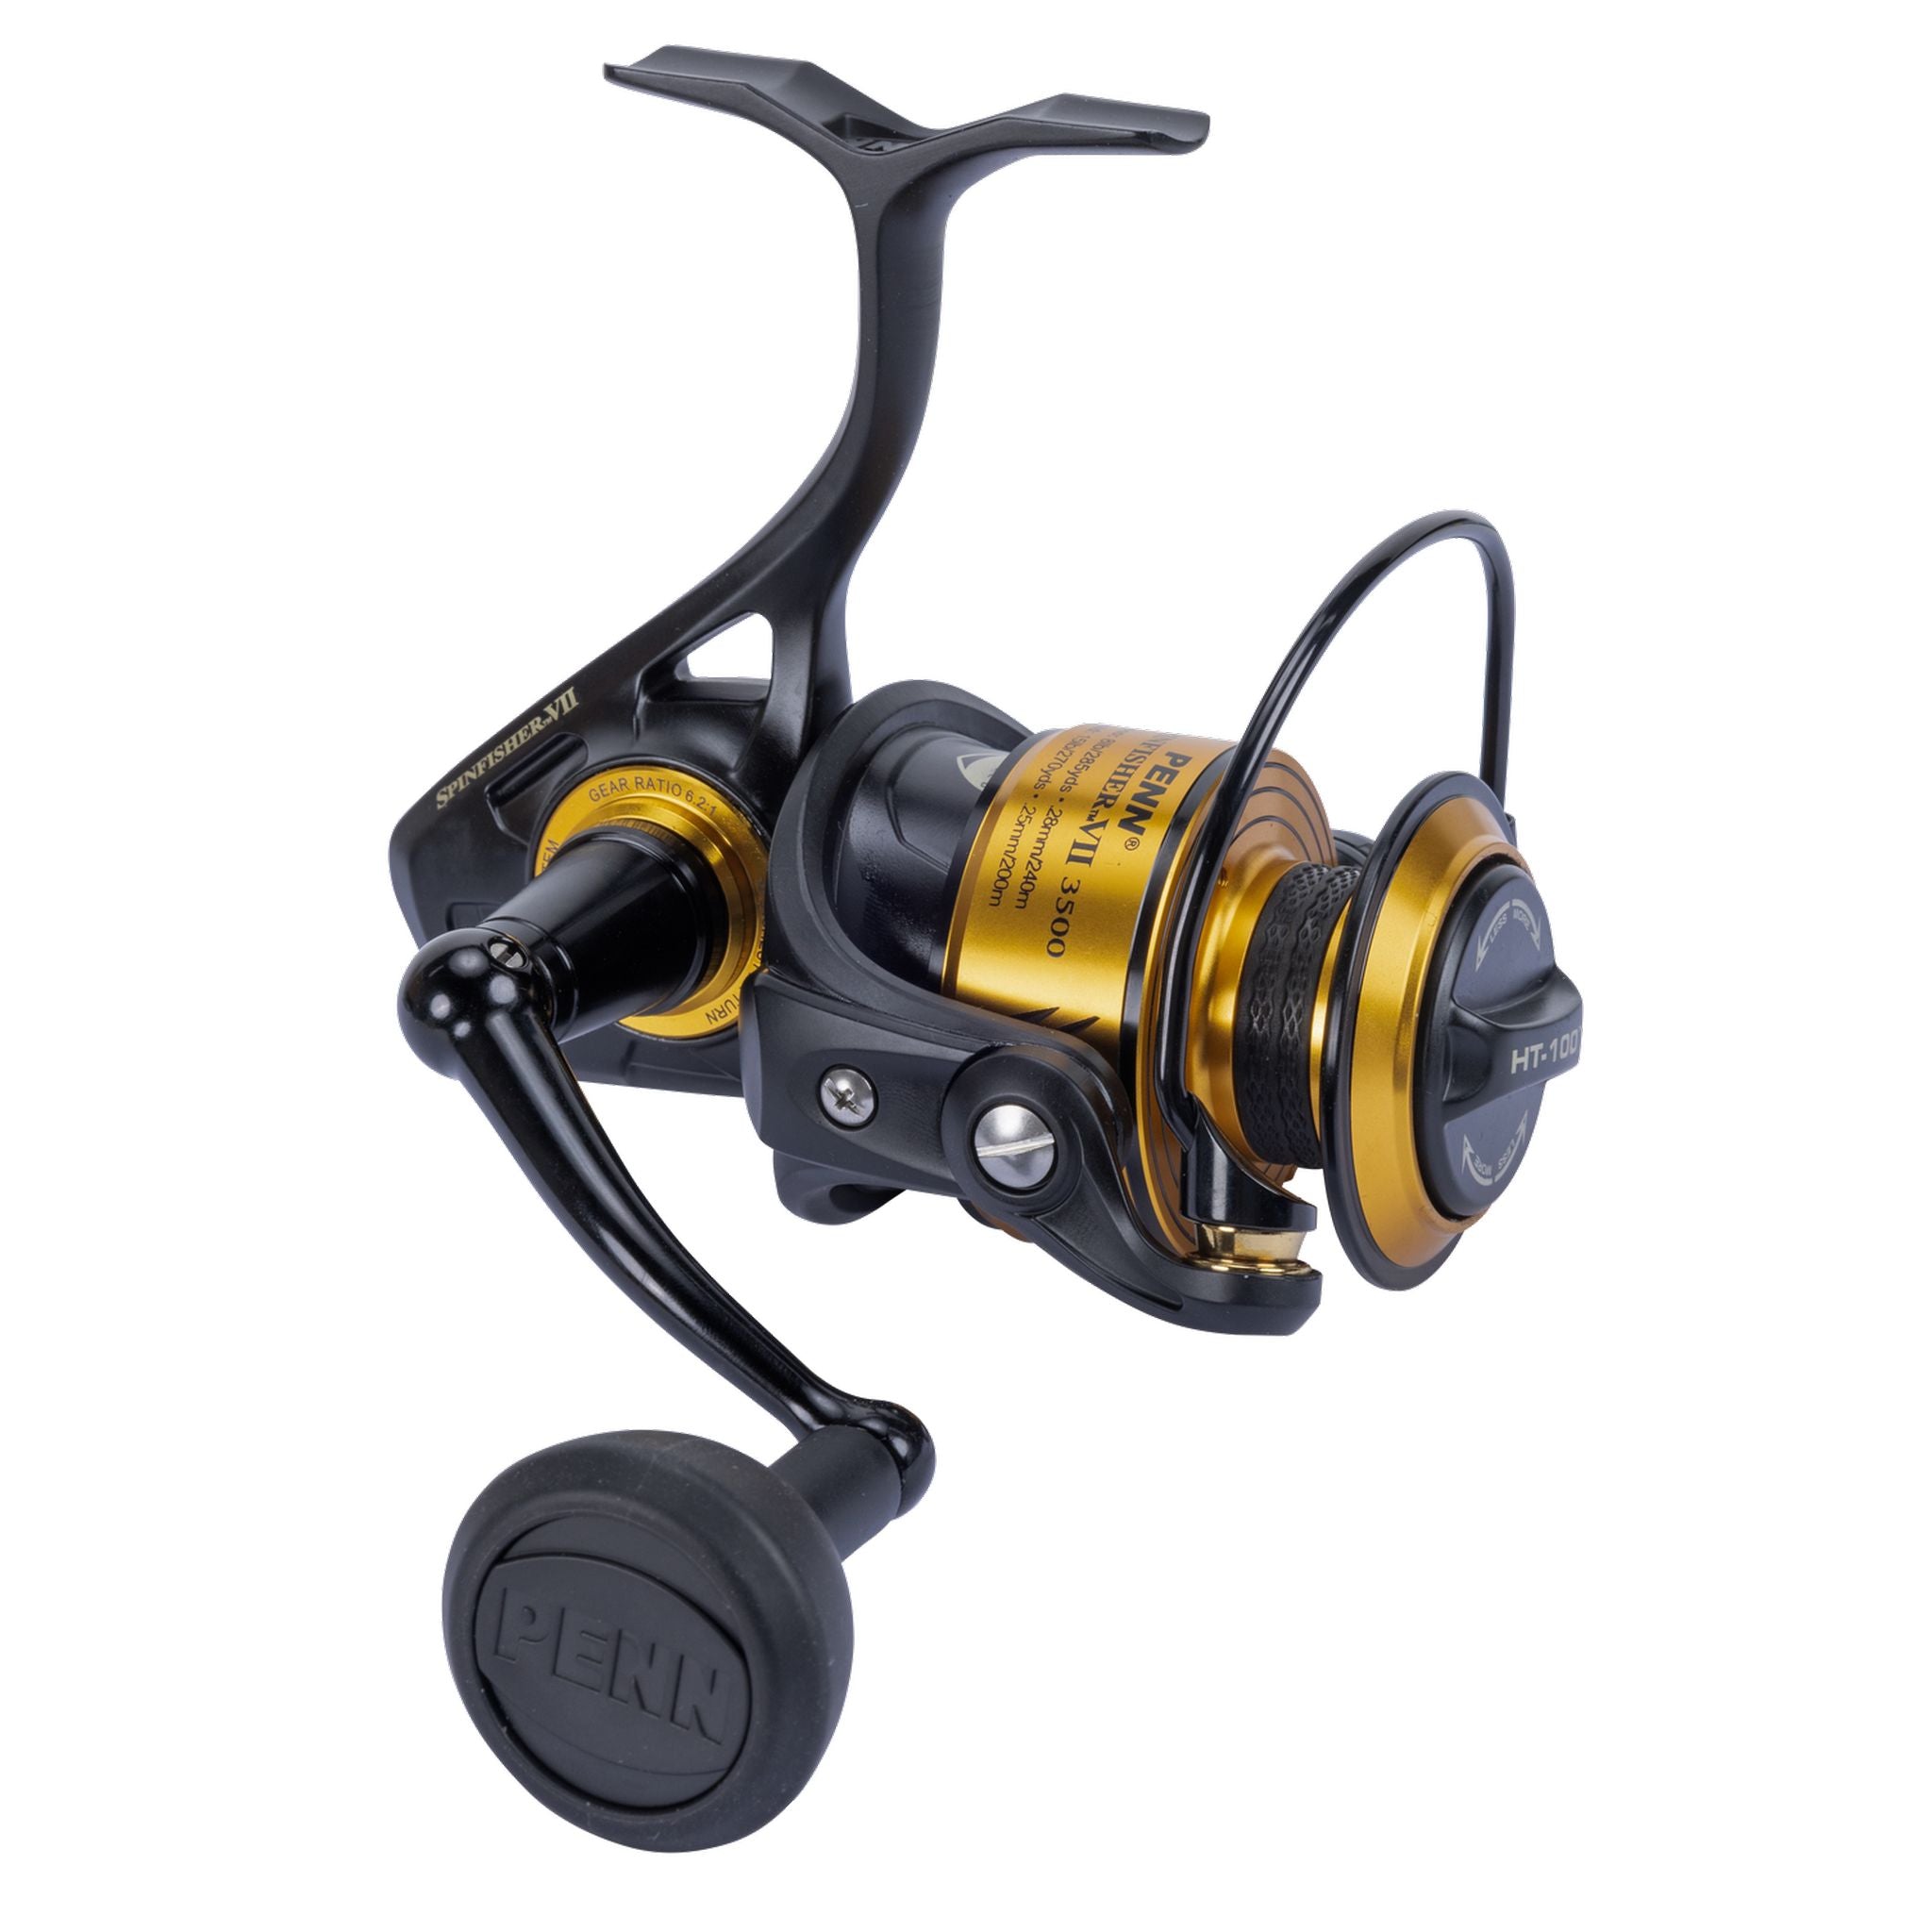 Penn Spinfisher vii 3500 SP BX ANZ Spin Reel